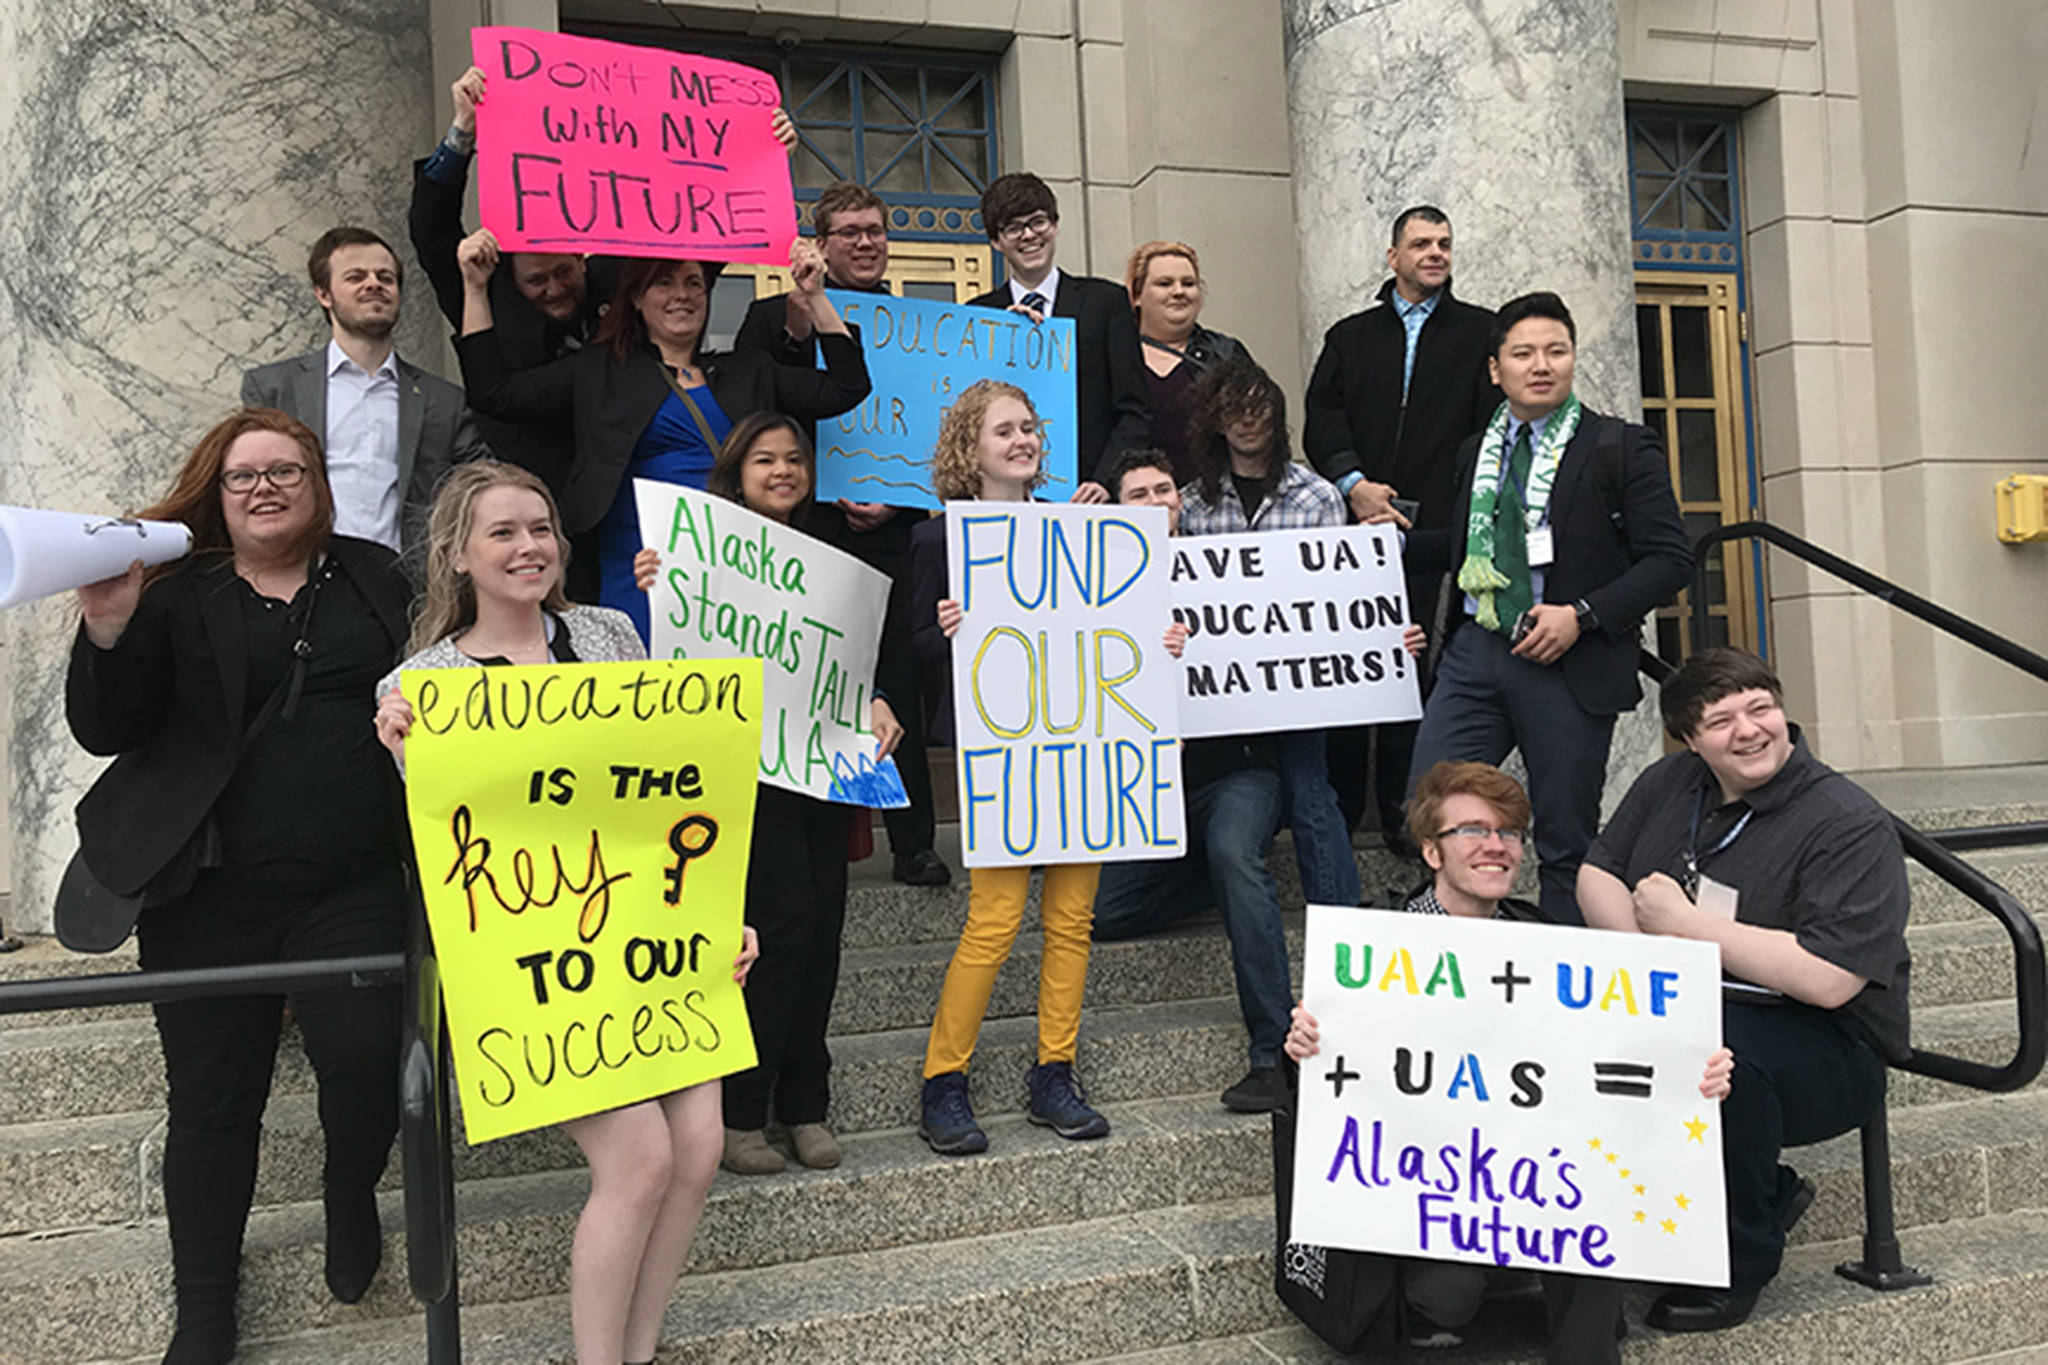 Students from the University of Alaska system pose for a photo after a rally on Monday, March 18, 2019. (Mollie Barnes | Juneau Empire)